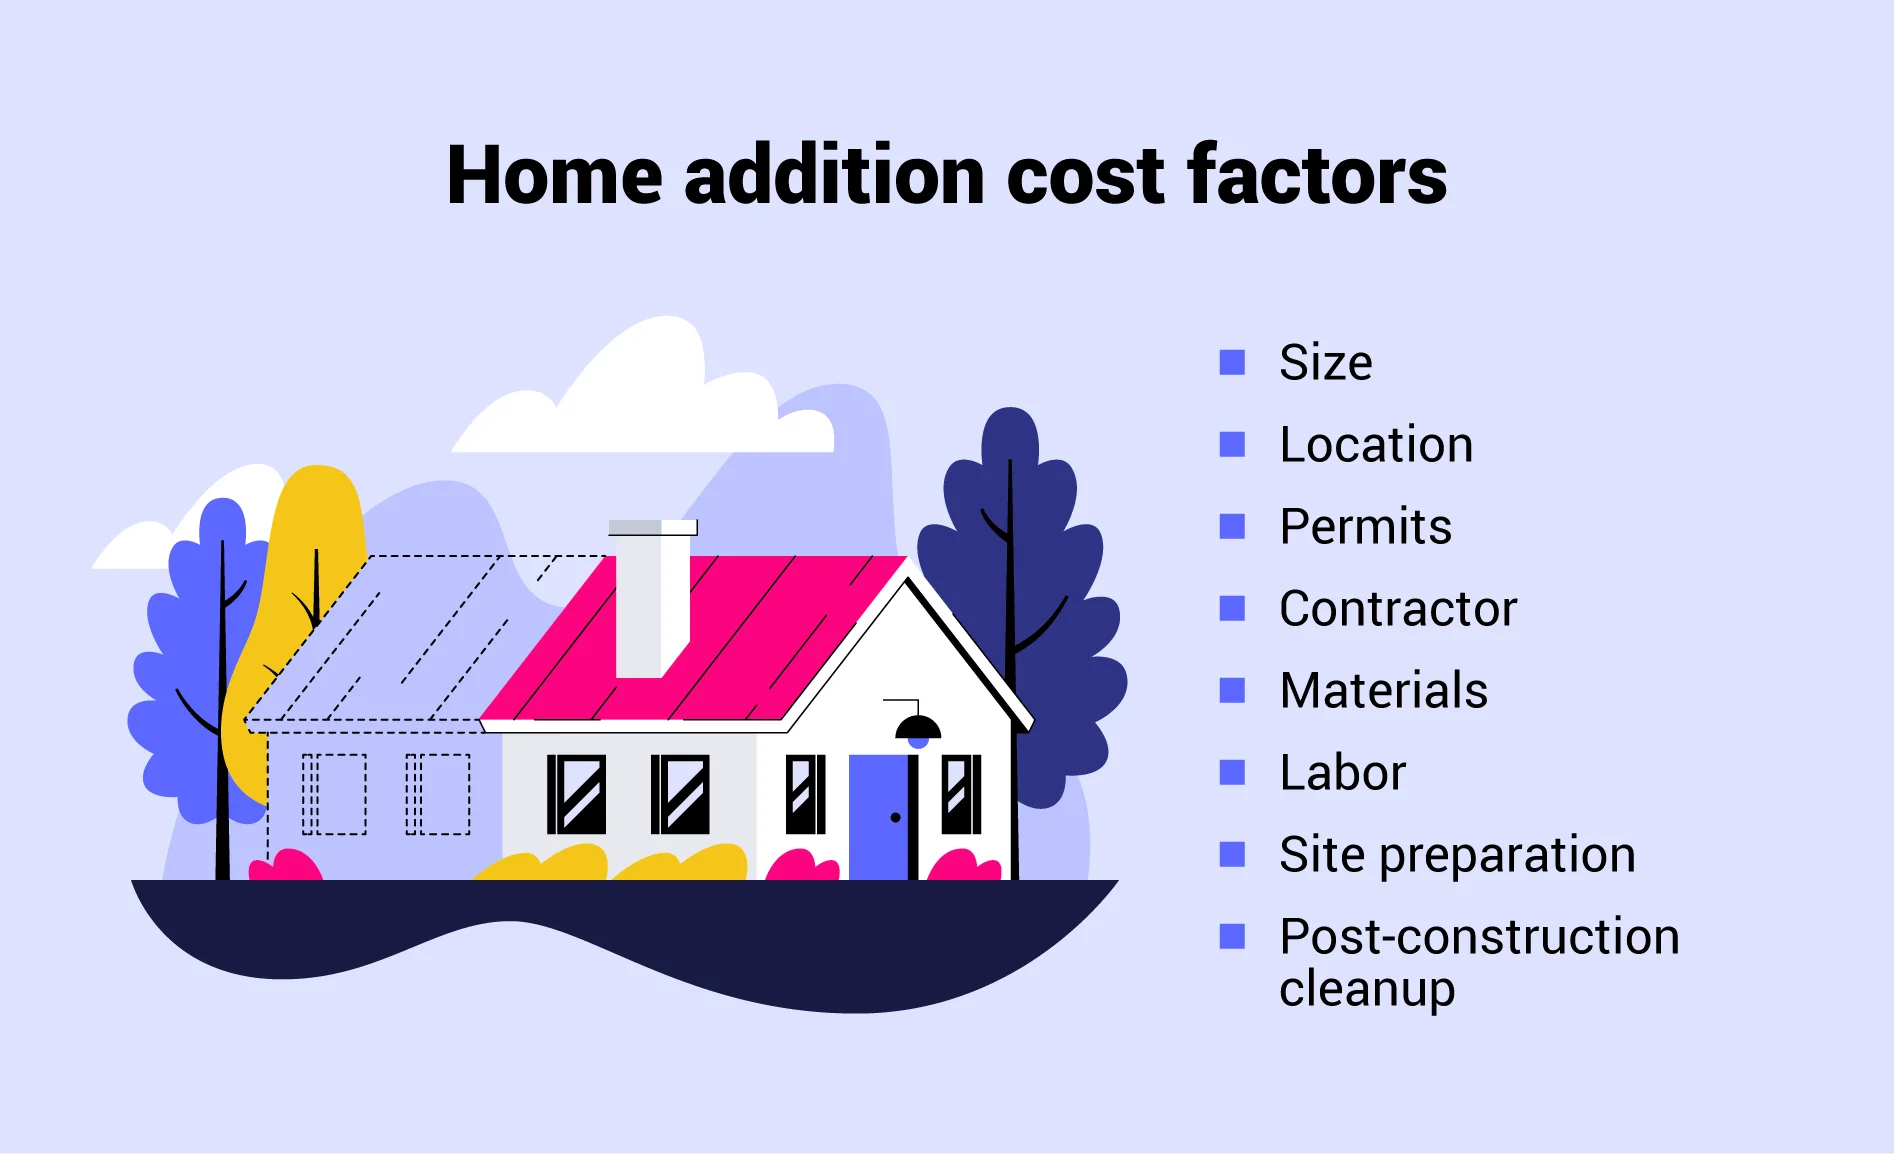 Factors that affect home addition costs